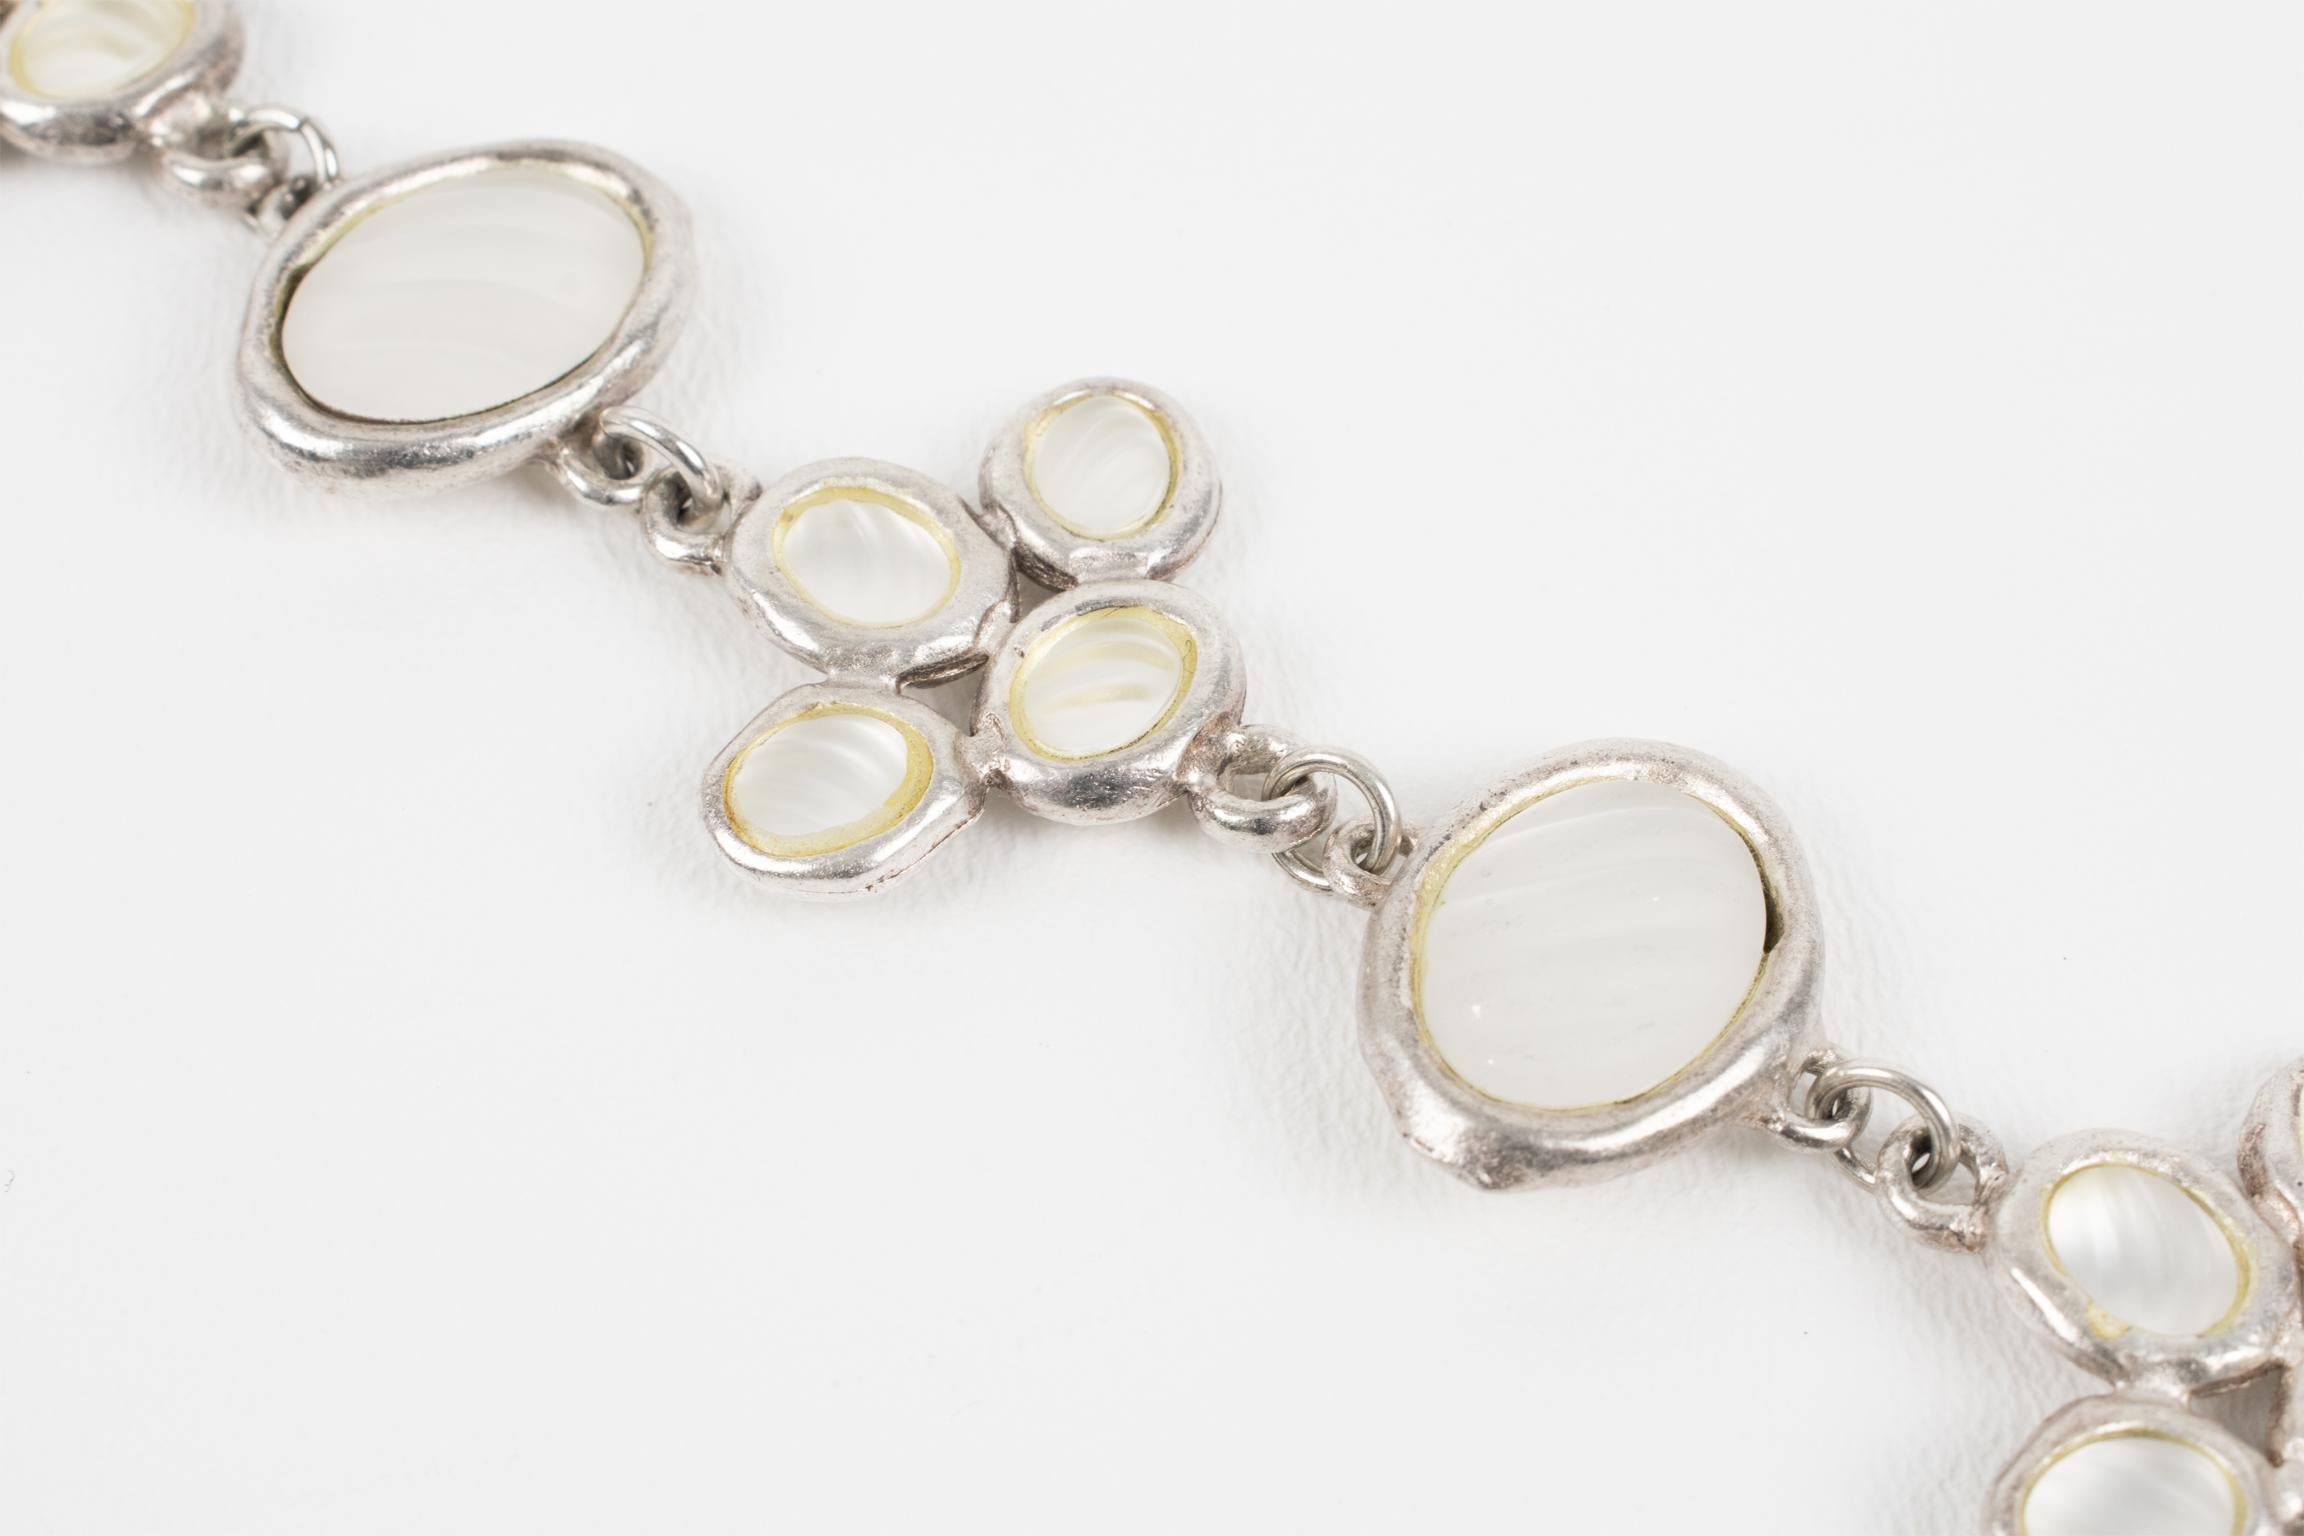 Gres Paris Link Bracelet Silvered Metal with Frosted Glass Cabochons For Sale 4